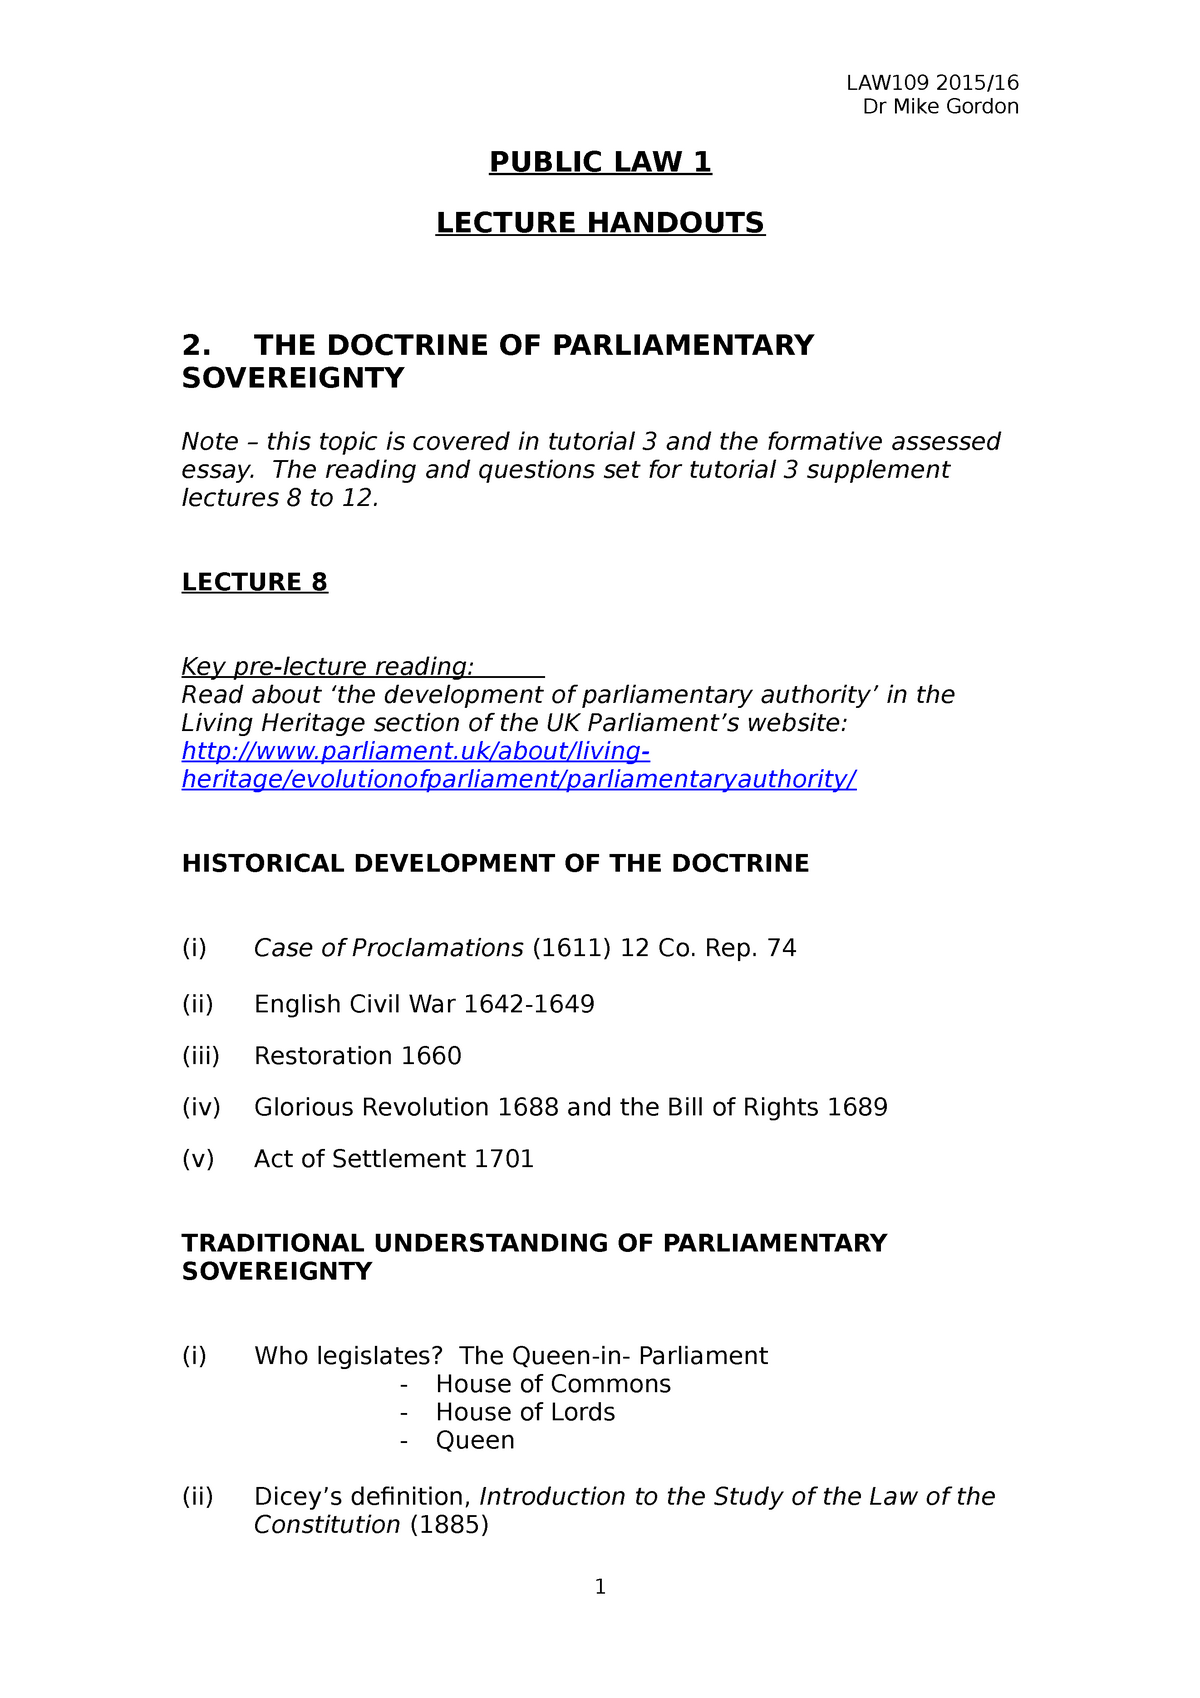 parliamentary sovereignty essay questions